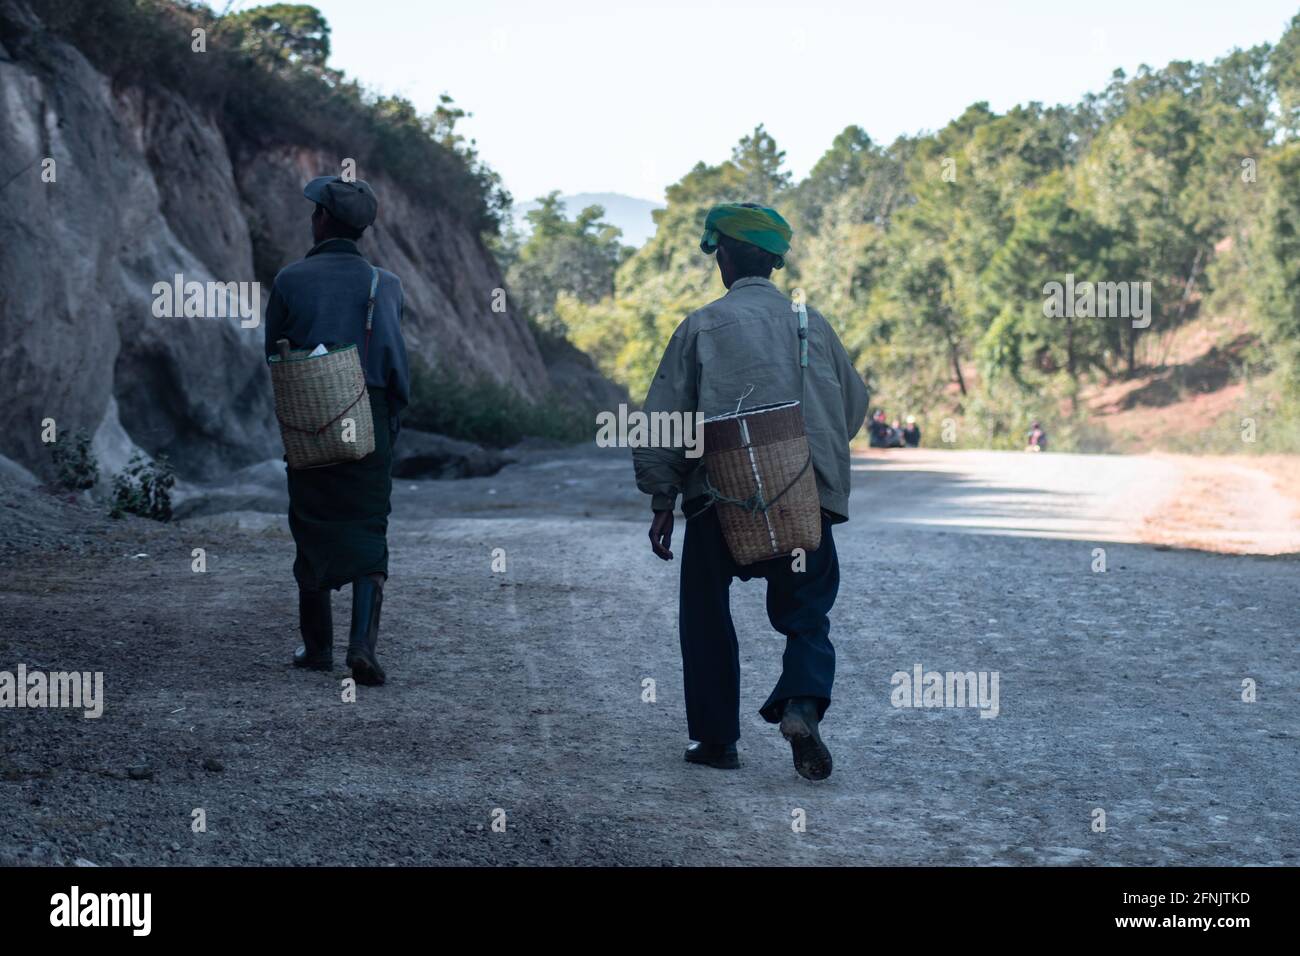 Two local burmese men carry a basket while walking down a gravel road between Kalaw and Inle Lake, Shan state, Myanmar Stock Photo